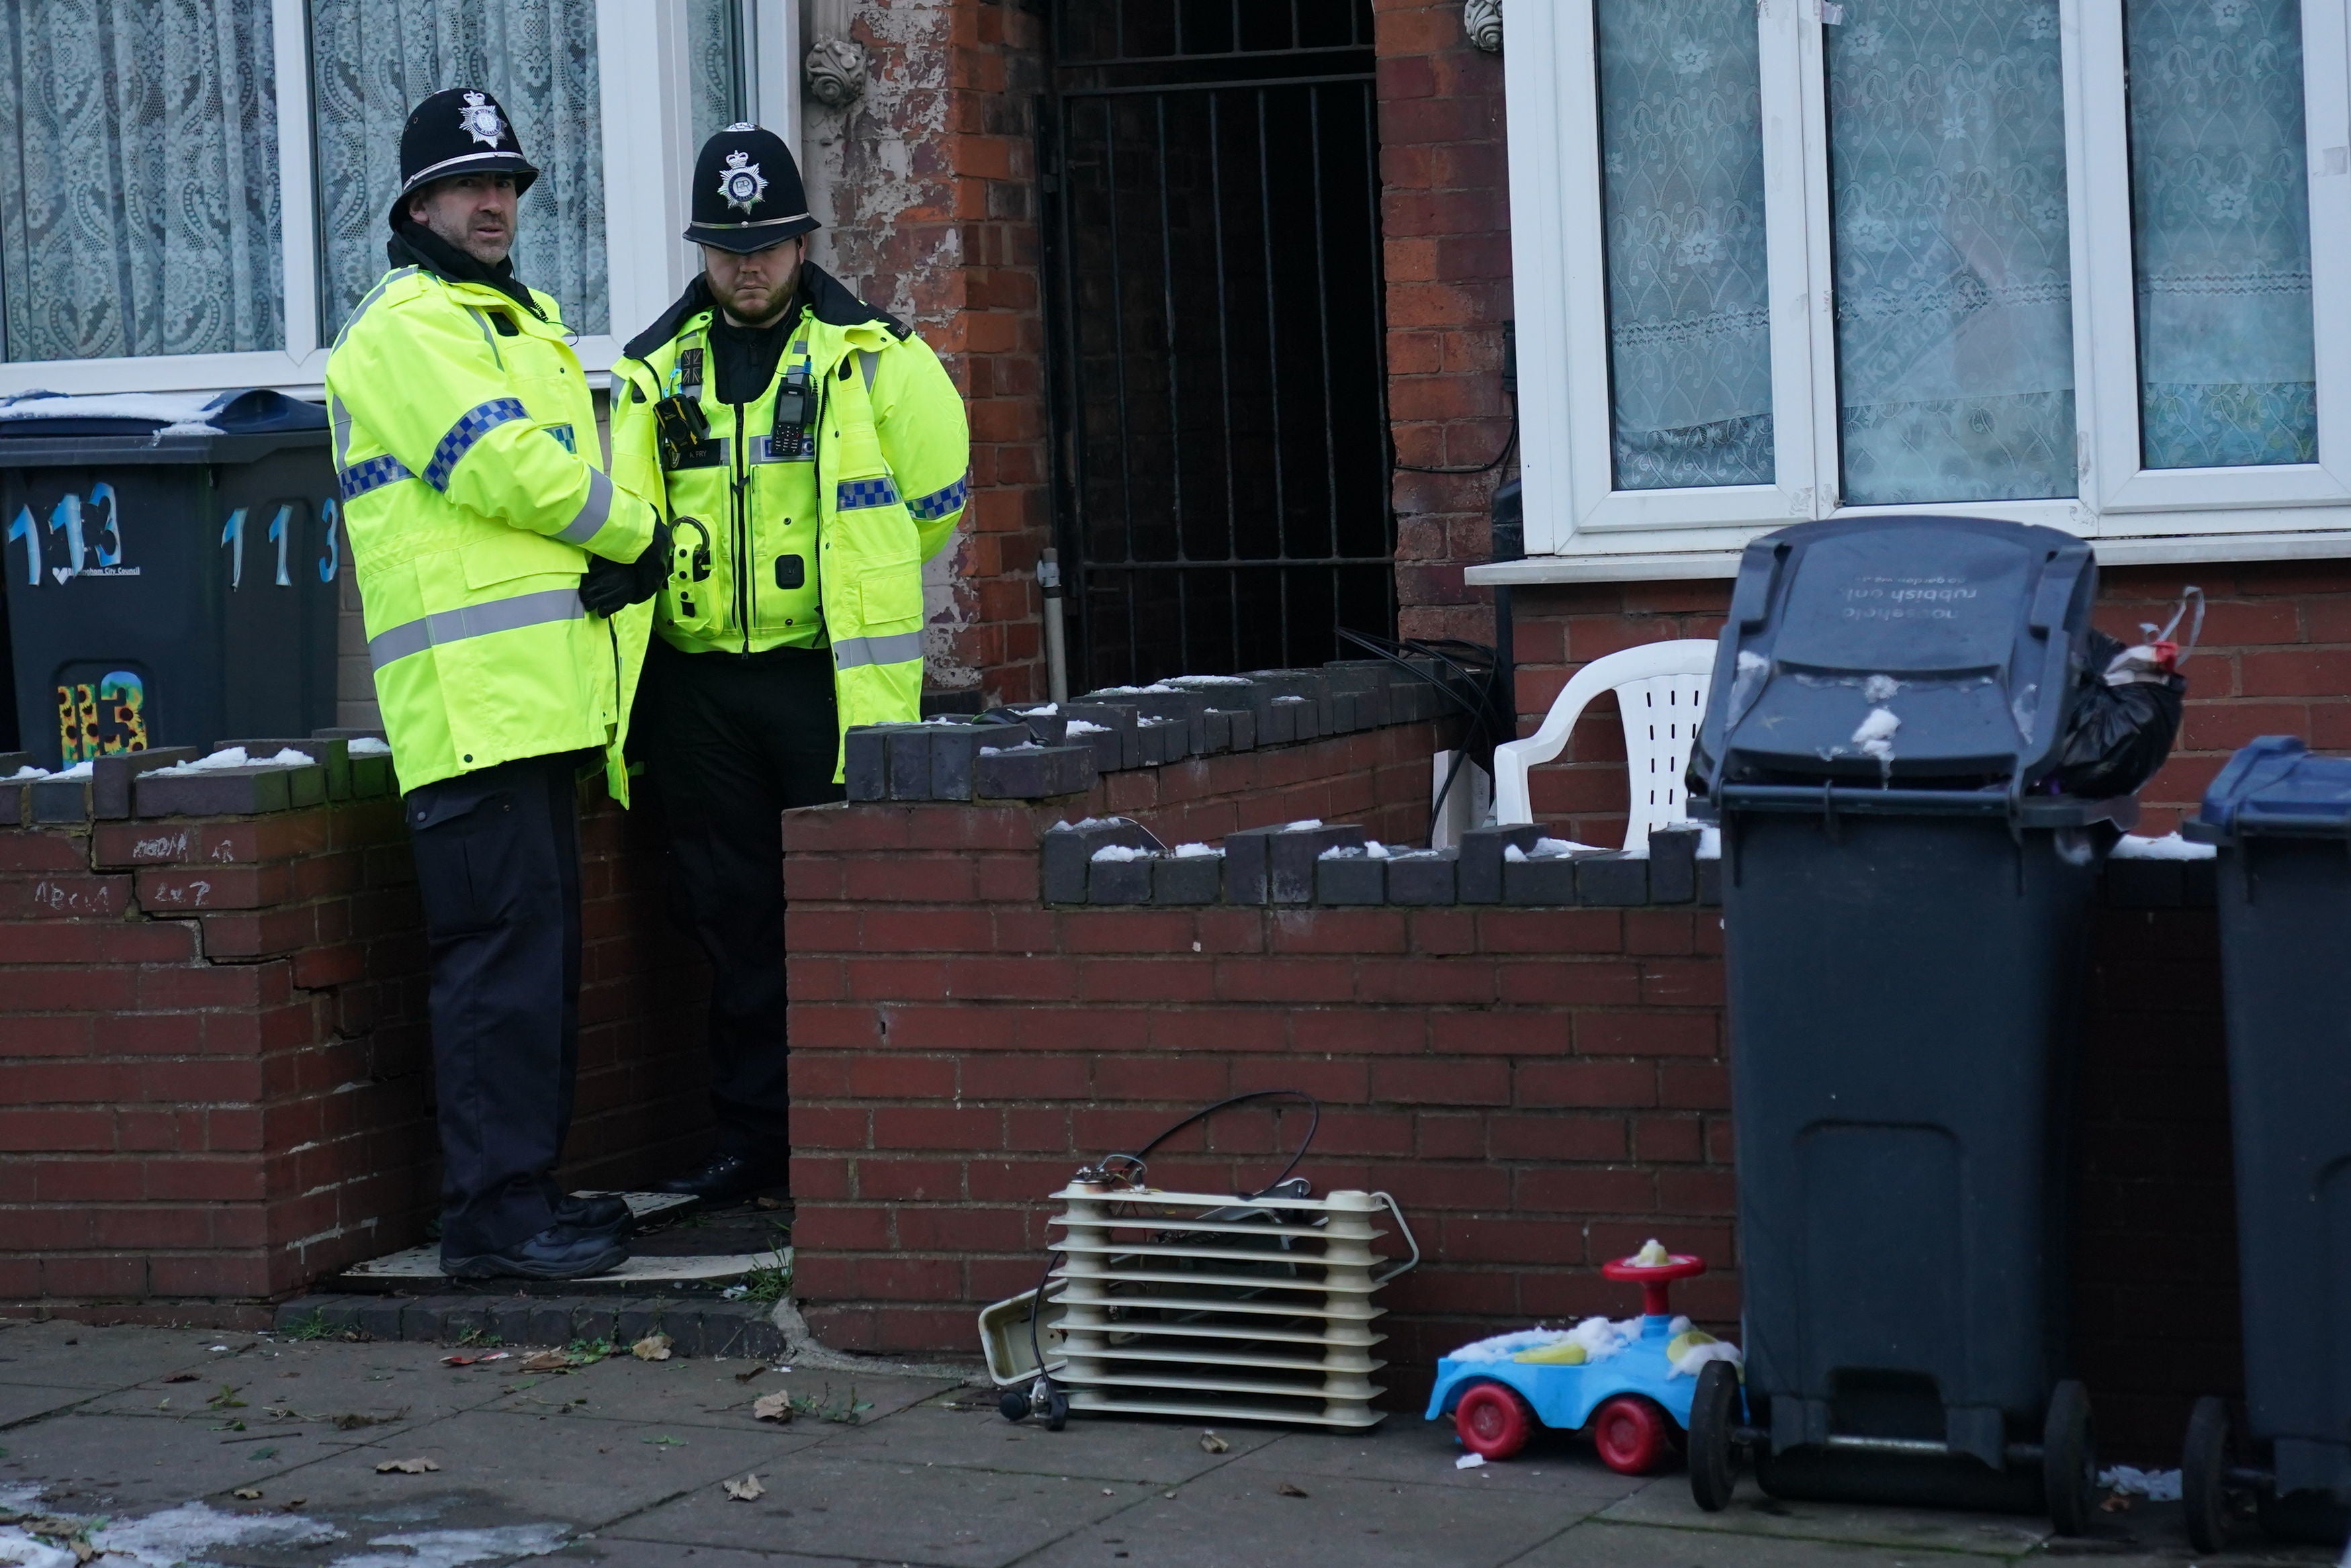 Police at a property in Handsworth, Birmingham, where searches have been taking place